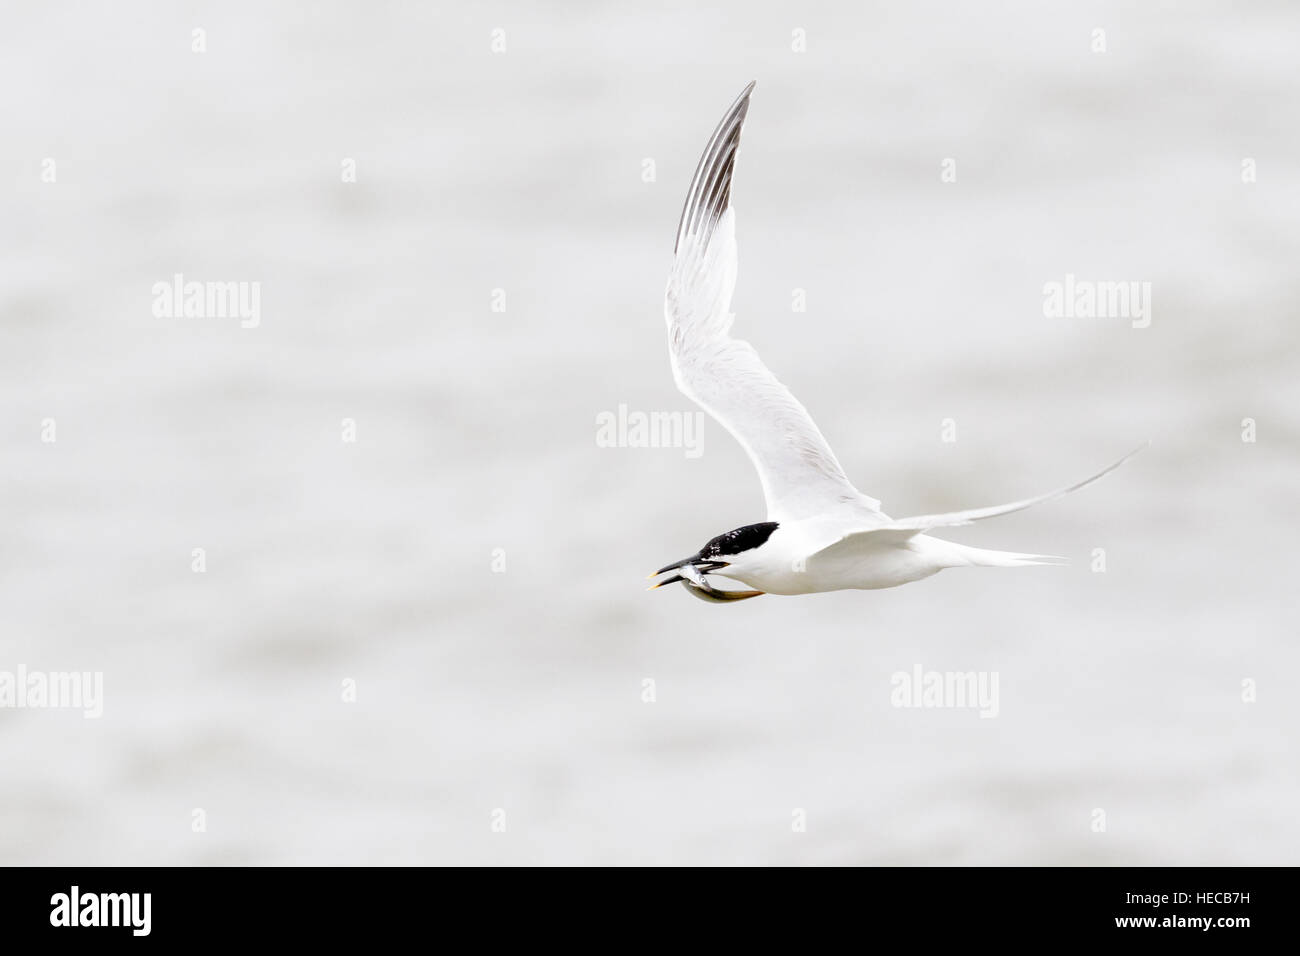 Sandwich tern (Sterna sandvicensis) flying over water with fish in bill, Texel, the Netherlands. Stock Photo